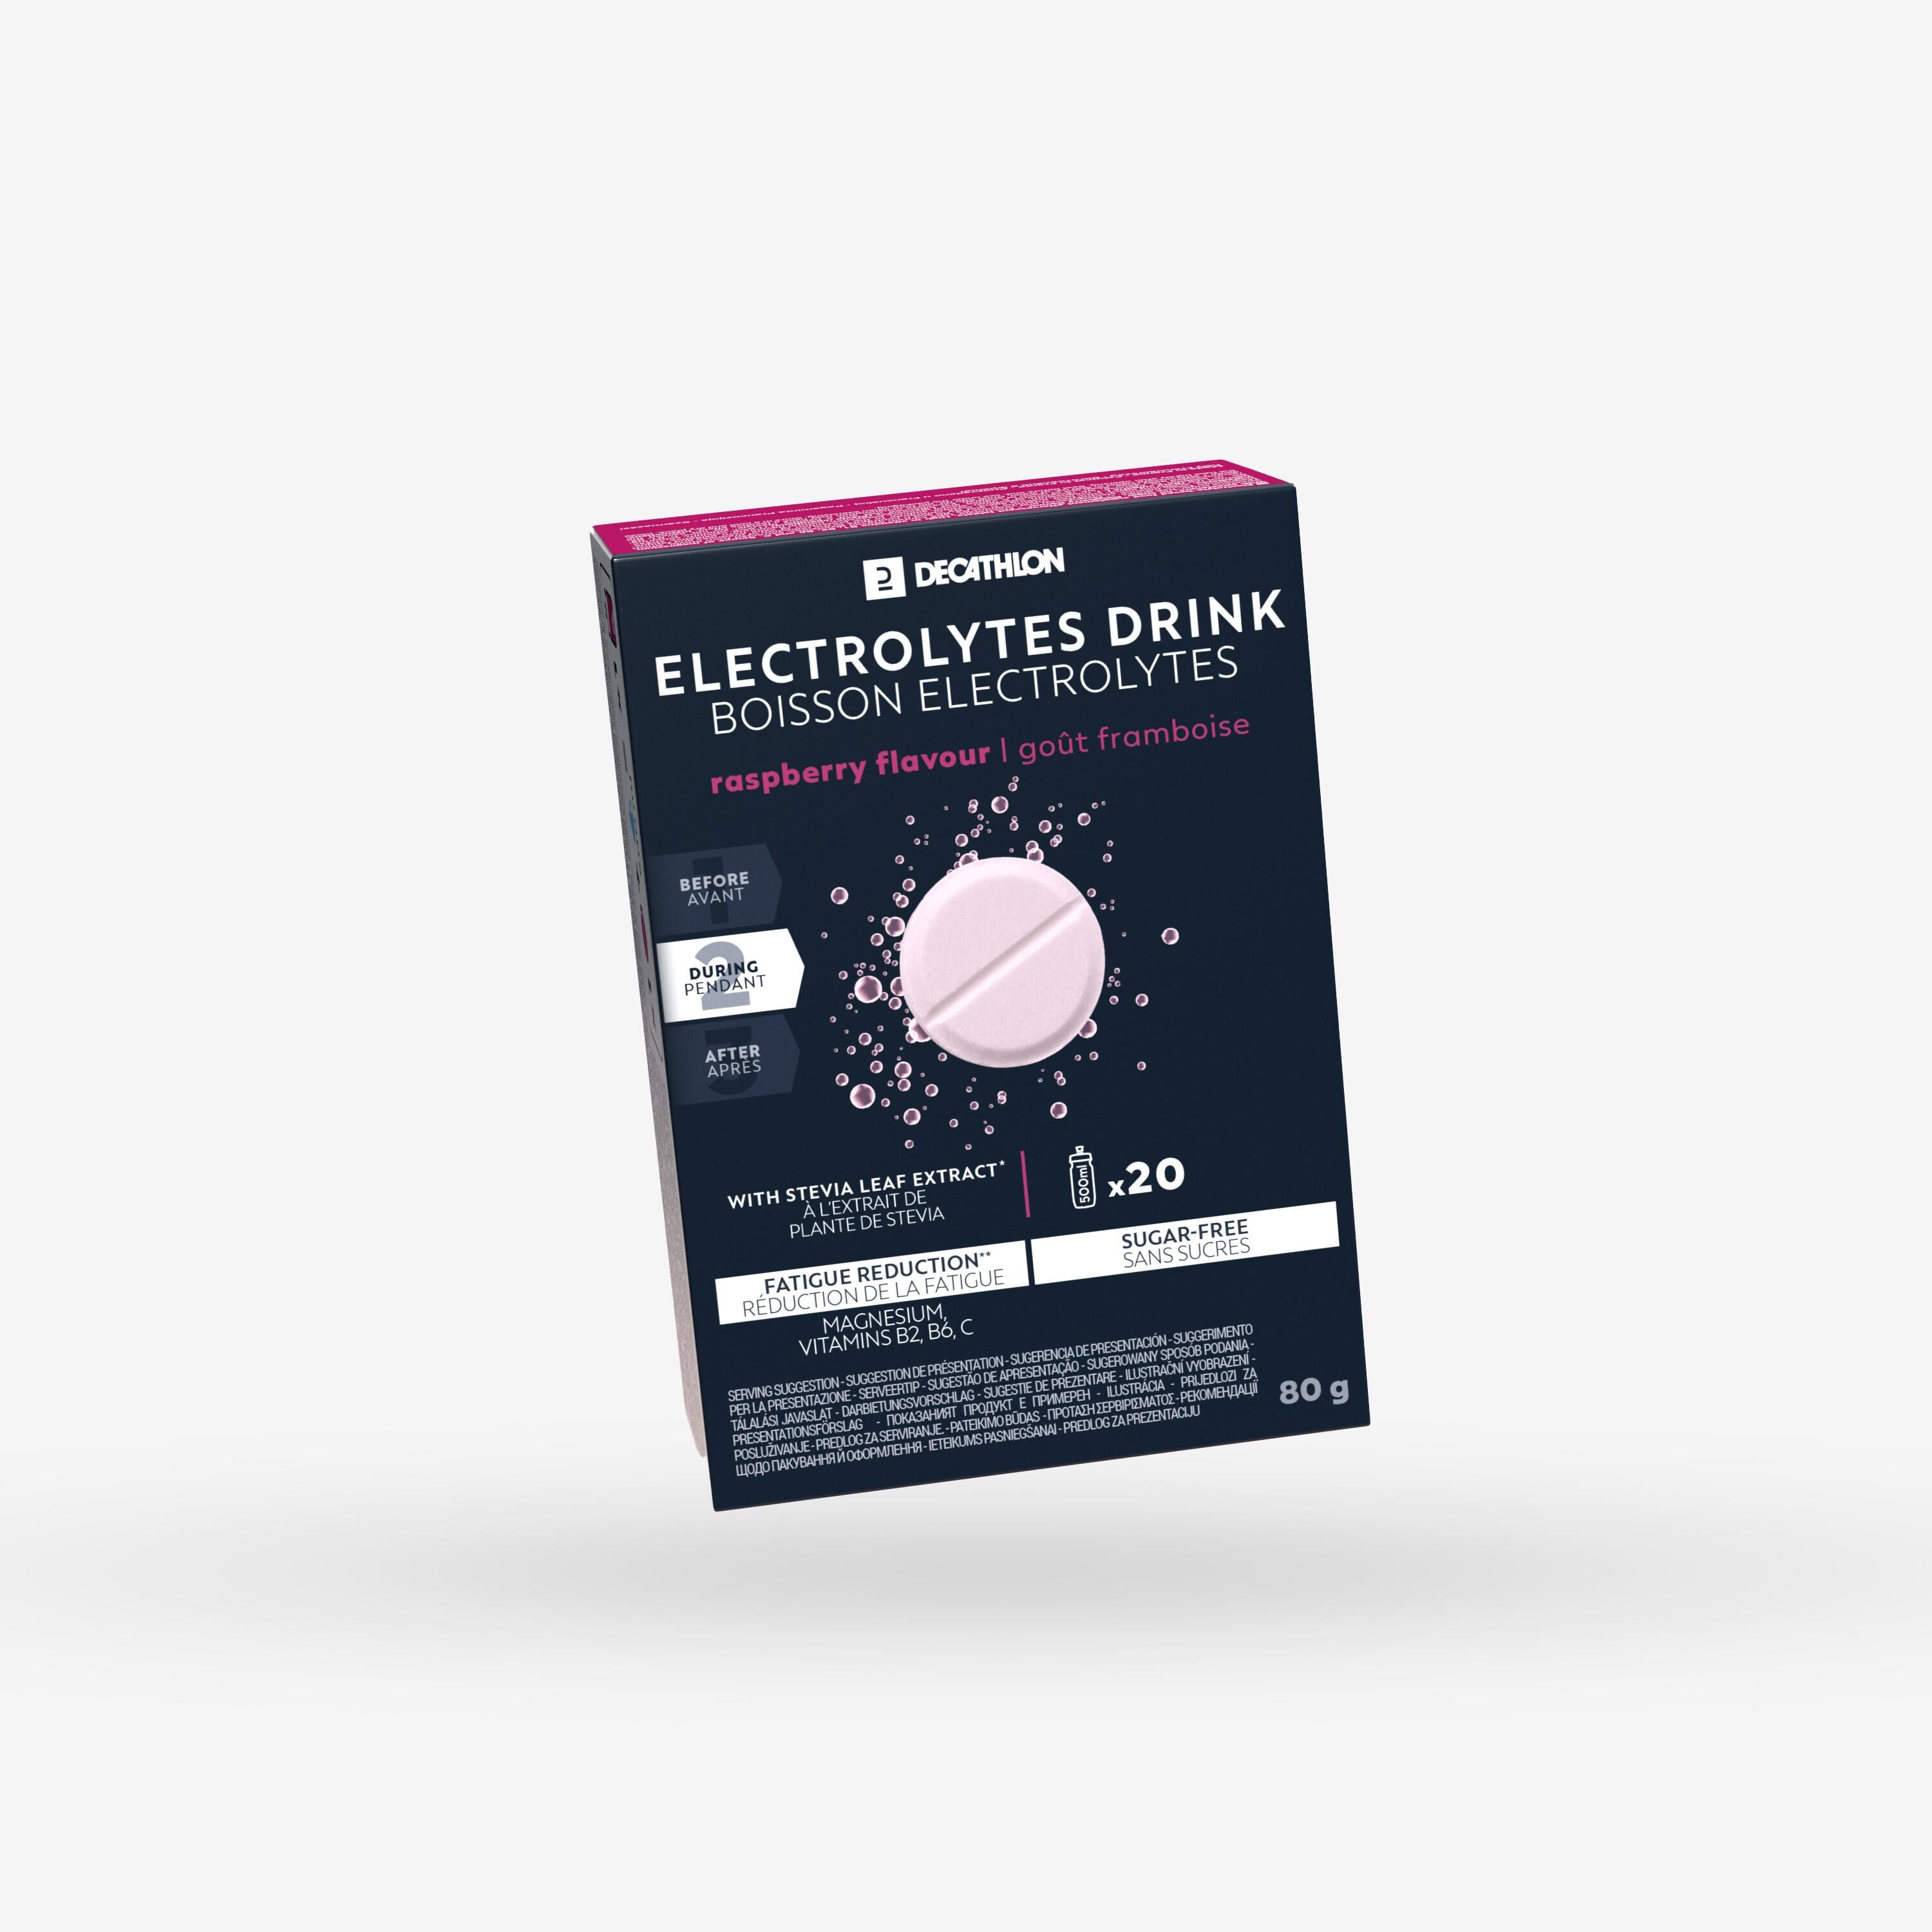 DECATHLON SUGAR-FREE ELECTROLYTES DRINK FIZZY TABLETS - MIXED BERRIES 20X4G